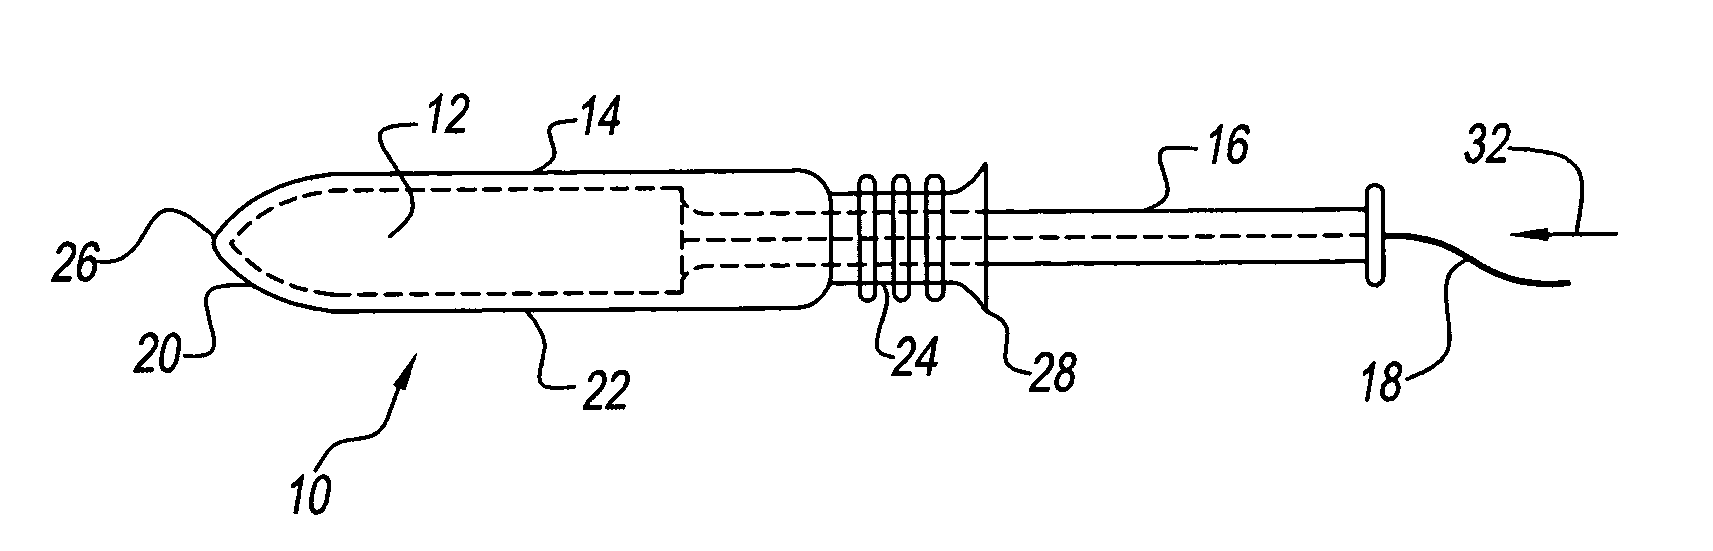 Tampon applicator assembly having an improved plunger and methods of making